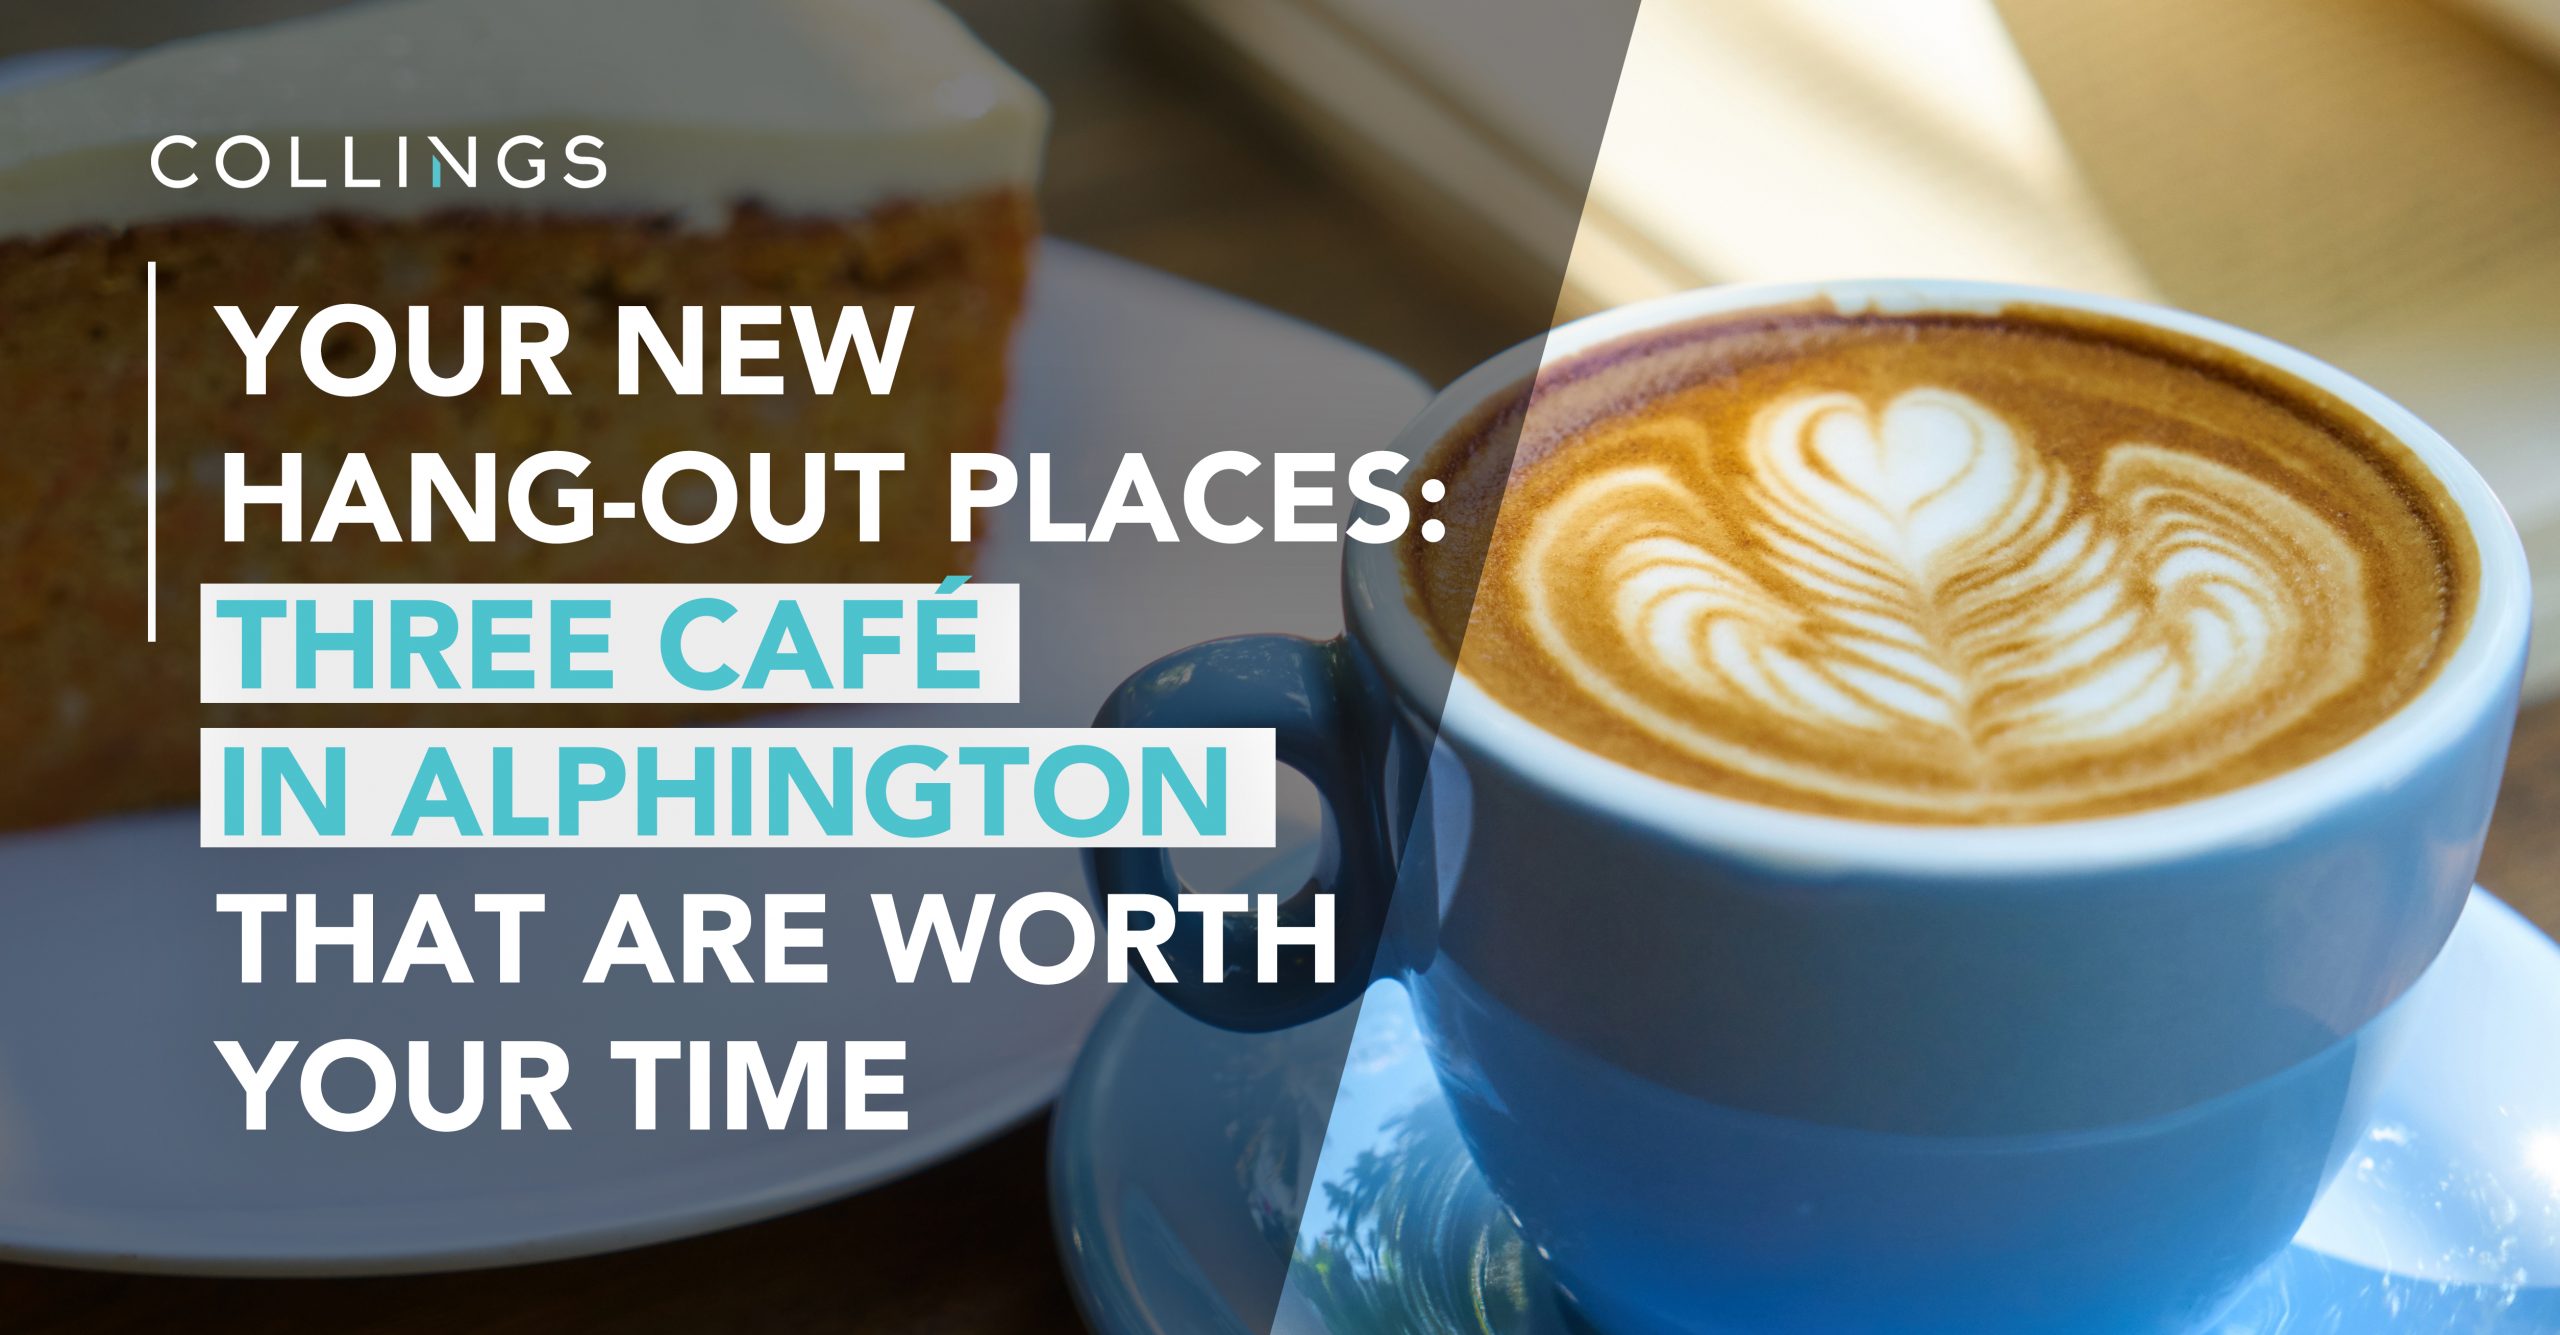 Three Cafes in Alphington That Are Worth Your Time